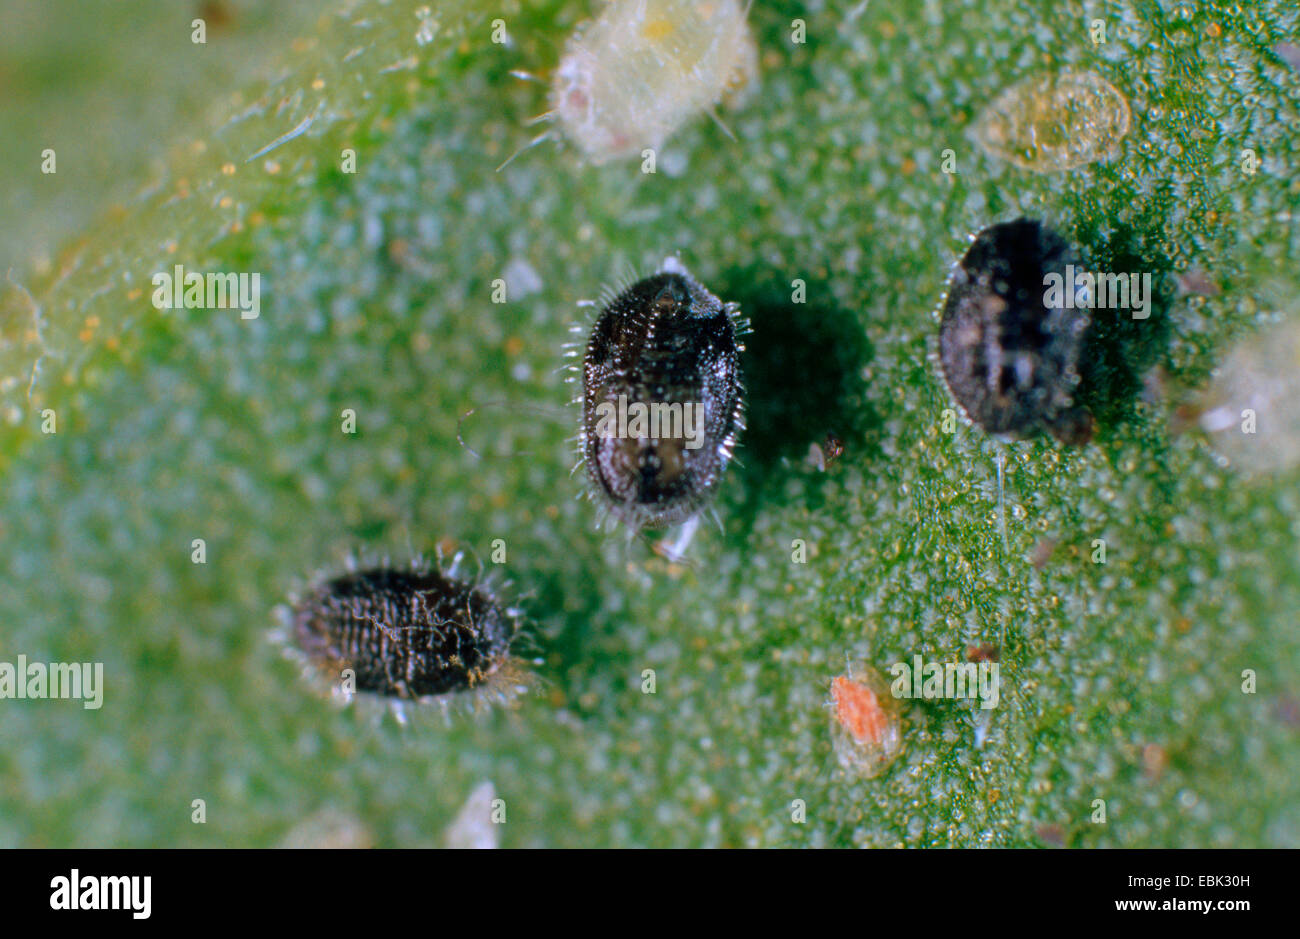 greenhouse whitefly (Trialeurodes vaporariorum), black larvae with ichneumon fly Encarsia formosa, biological control of pests Stock Photo